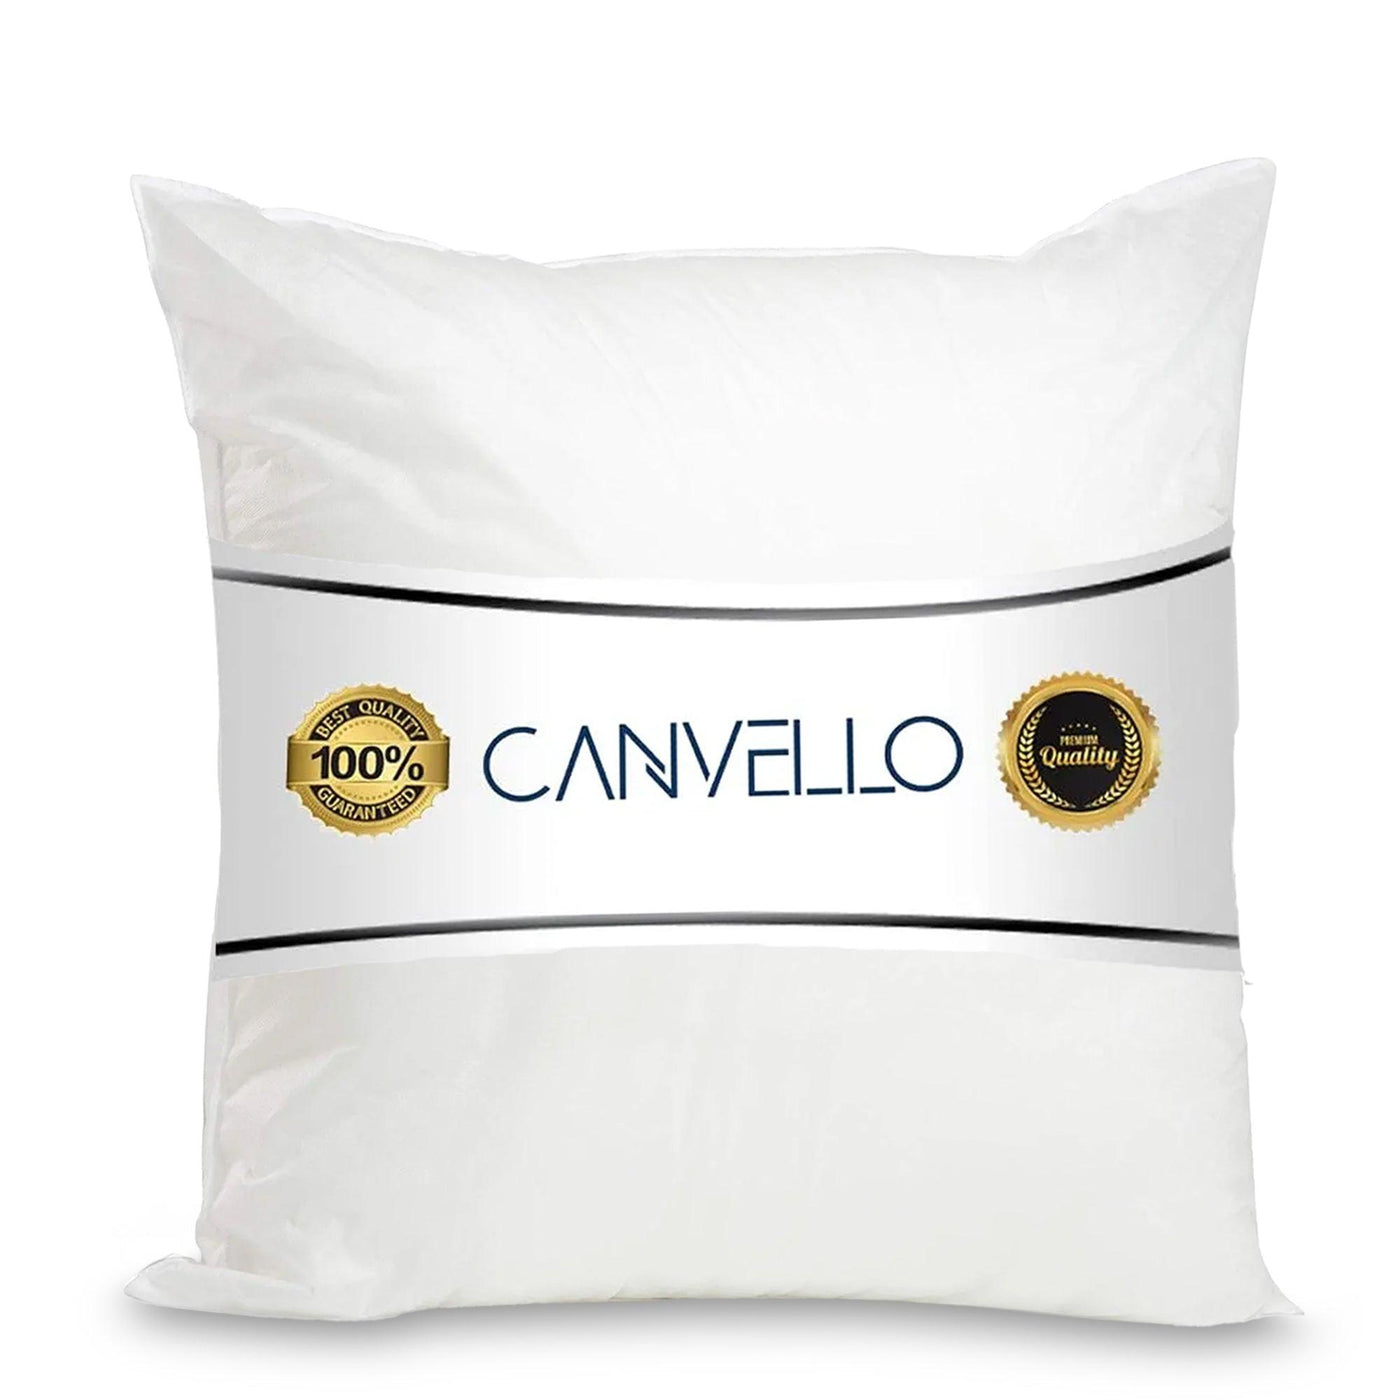 https://canvellostudio.com/cdn/shop/files/canvello-decorative-pillow-inserts-throw-pillow-insert-down-feather-fill-for-extra-fluff-with-233-thread-count-100percent-cotton-cover-quality-checked-in-u-s-a-canvello-9_b025ae76-2c63-4da1-9fc9-22b8945c6f6e_1400x.jpg?v=1688097359